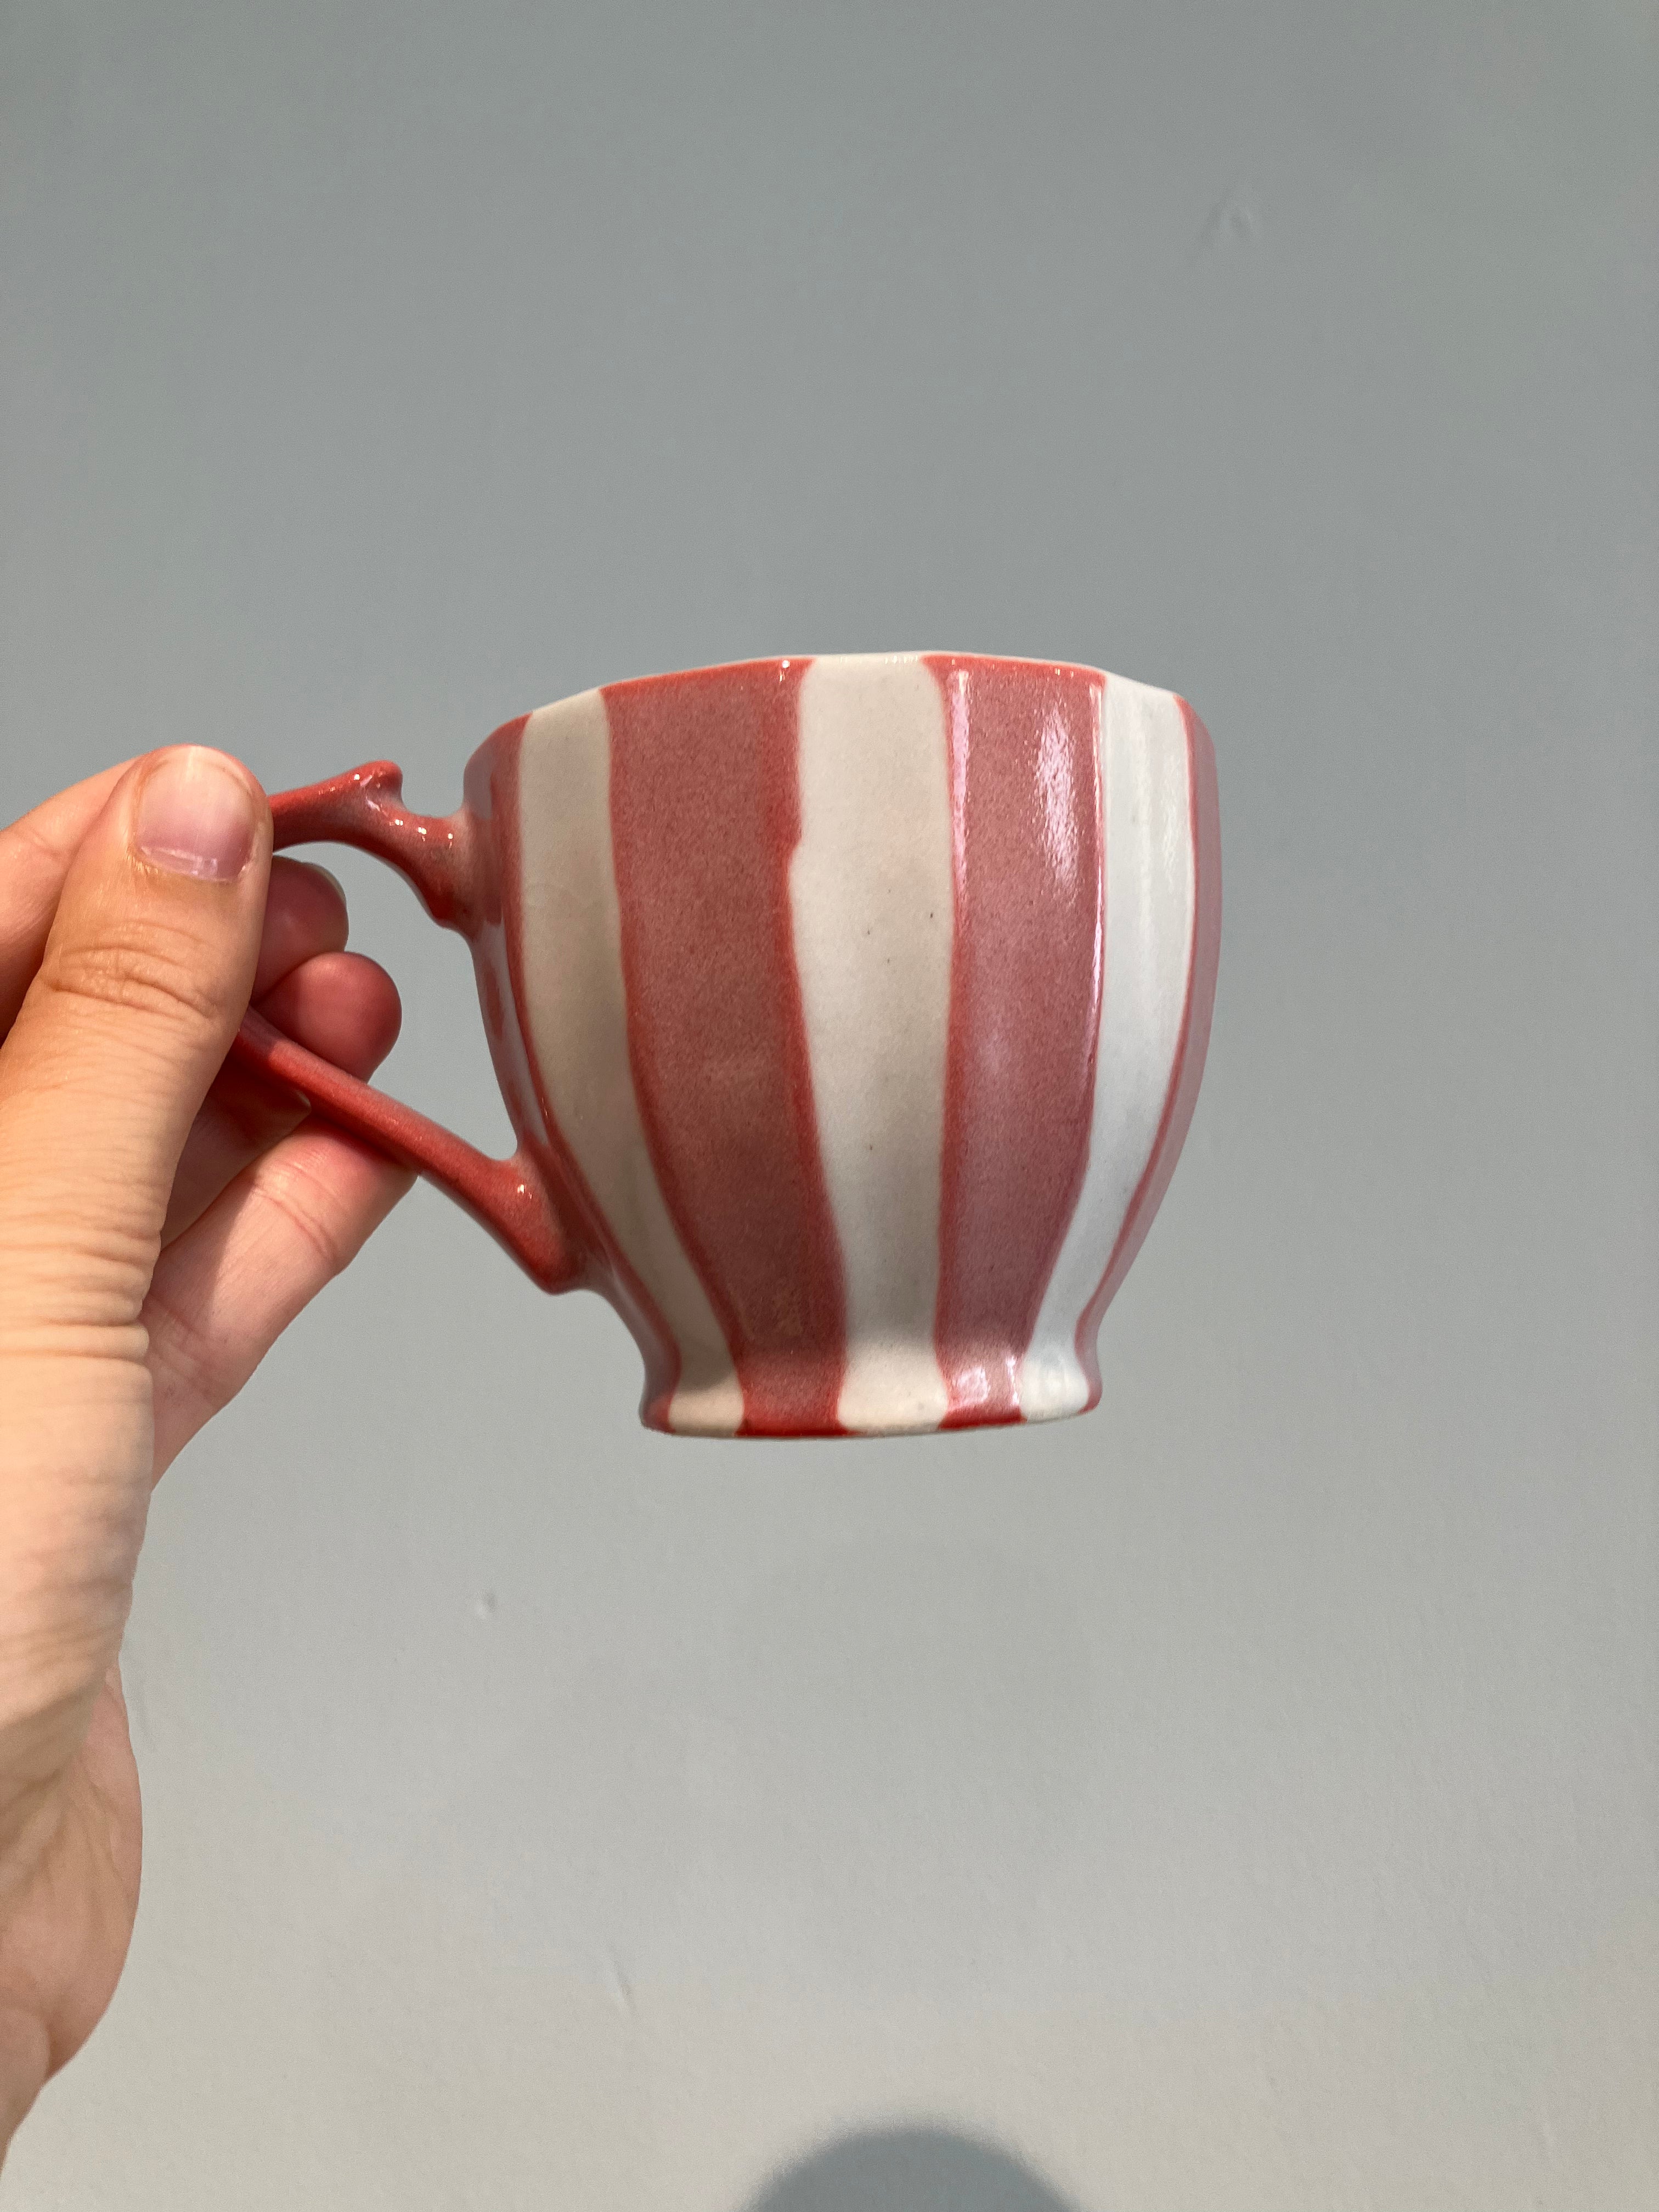 Japanese cup with pink stripes